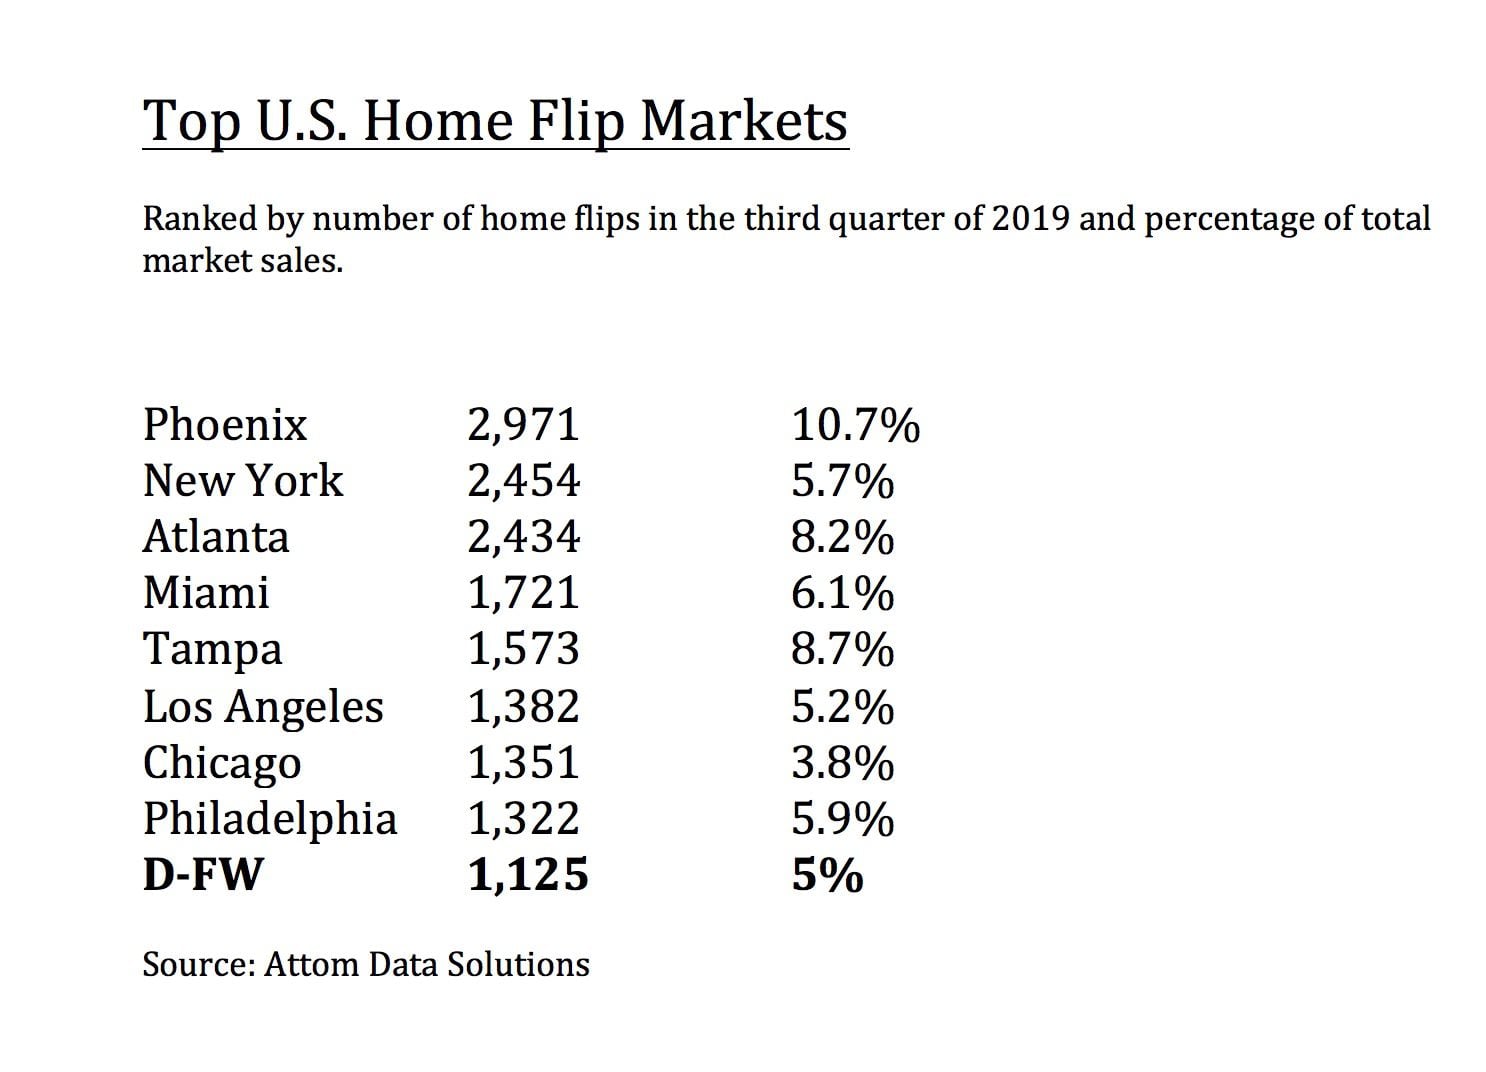 D-FW ranked 10th for home flips.